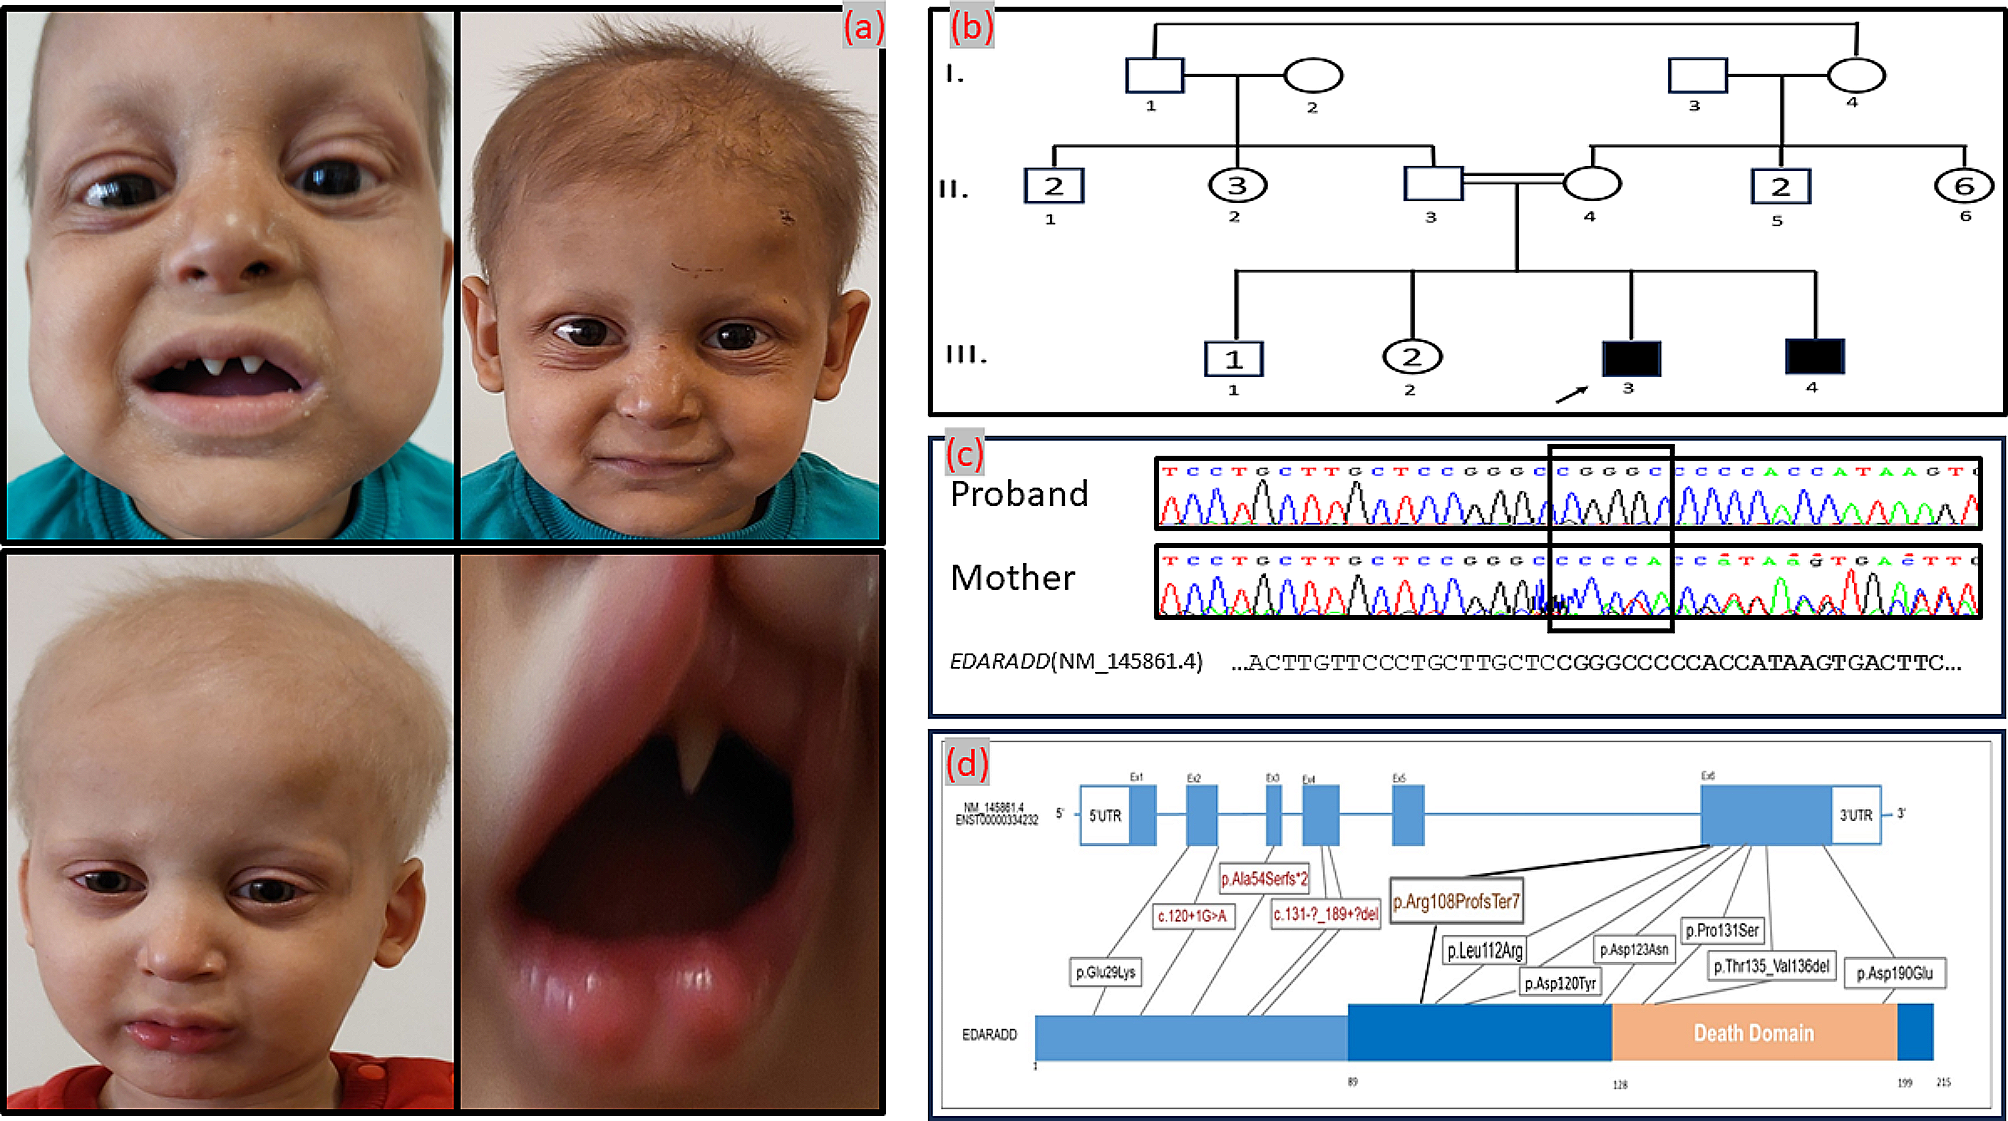 Novel homozygous frameshift insertion variant in the last exon of the EDARADD causing hypohidrotic ectodermal dysplasia in two siblings: case report and review of the literature